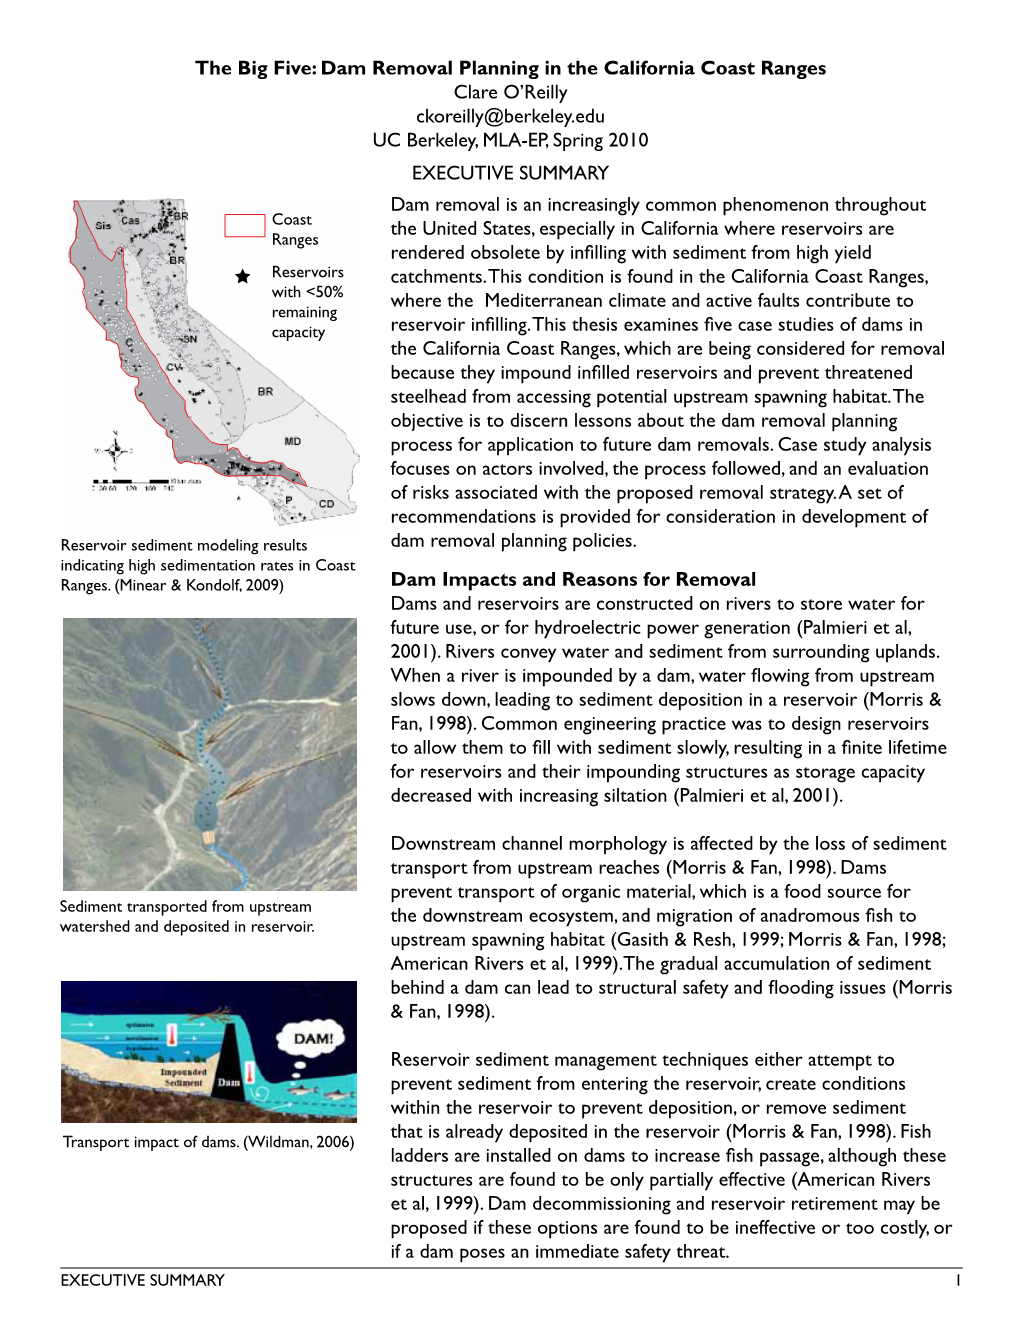 Dam Removal Planning in the California Coast Ranges Clare O